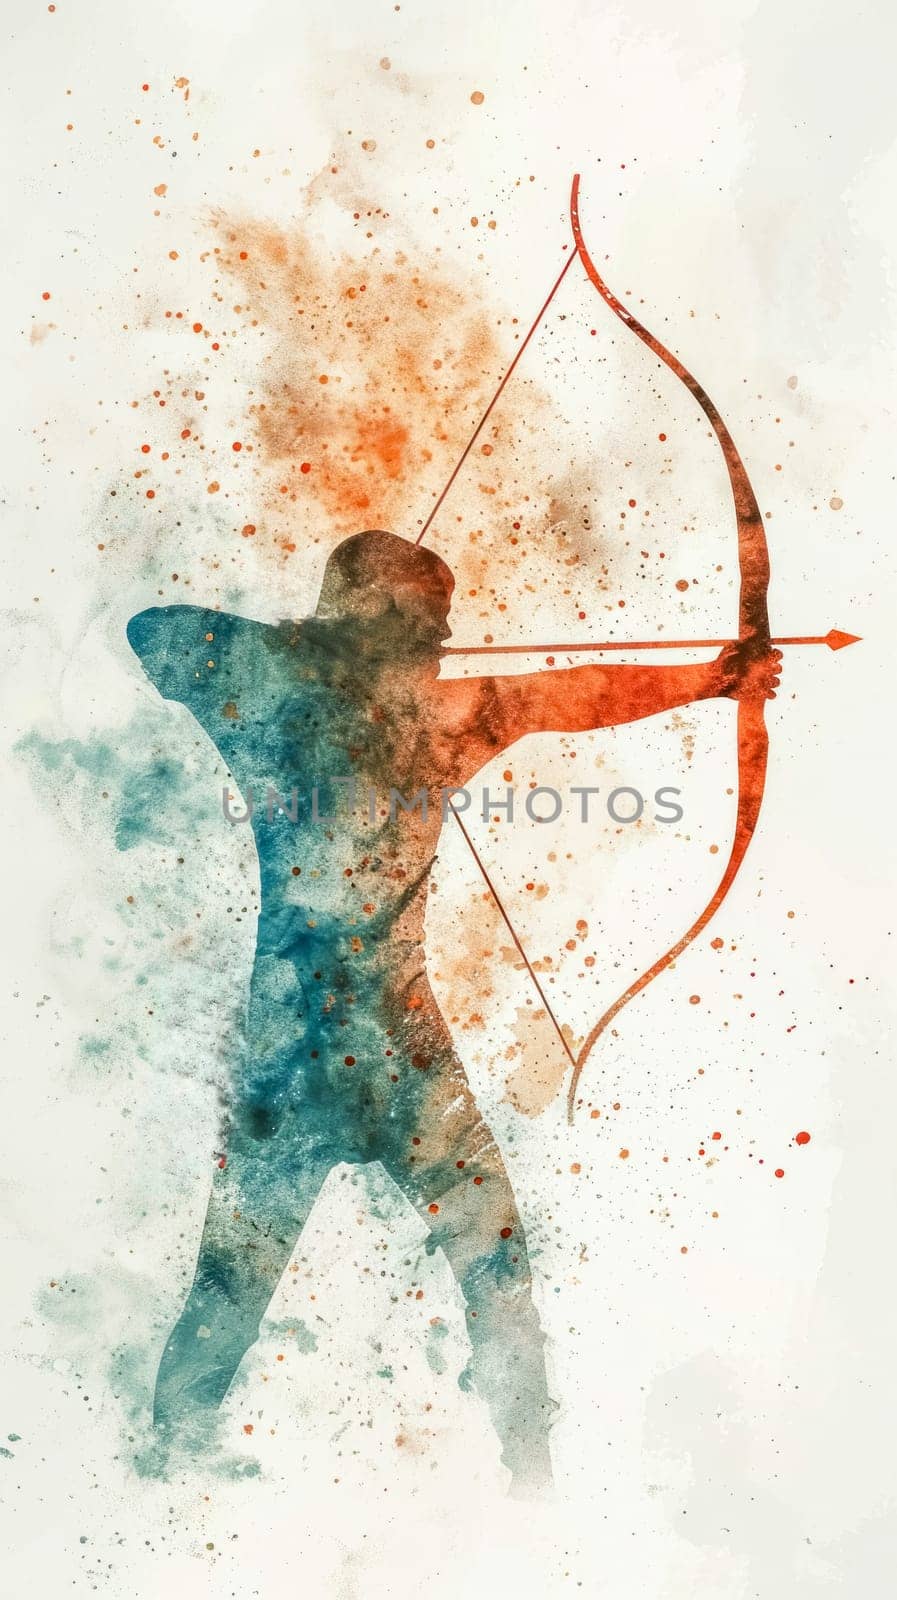 A silhouetted archer, crafted in watercolor splashes of blue and red, pulls back on a bow, poised to release an arrow, set against a splattered, textured background by Edophoto